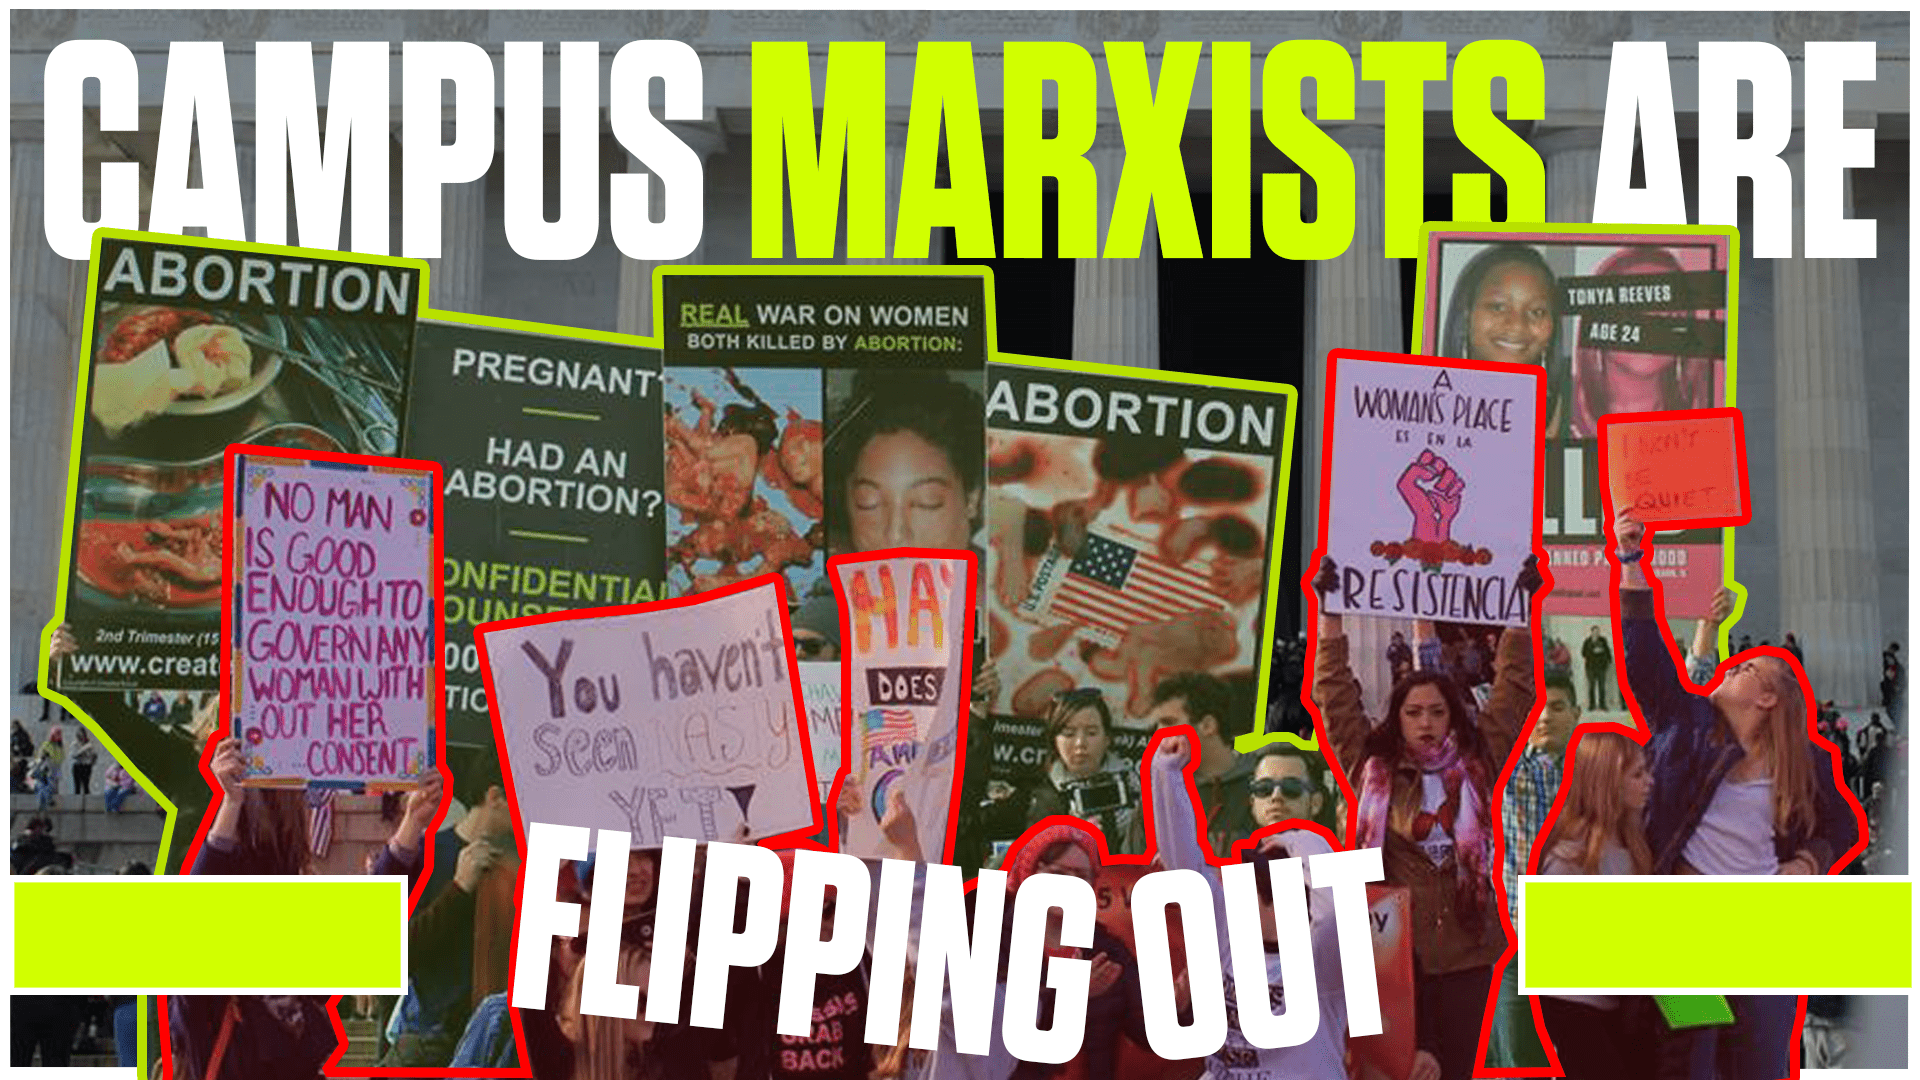 Unhinged: How Campus Marxists are Flipping Out | The Mark Harrington Show | 10-14-21